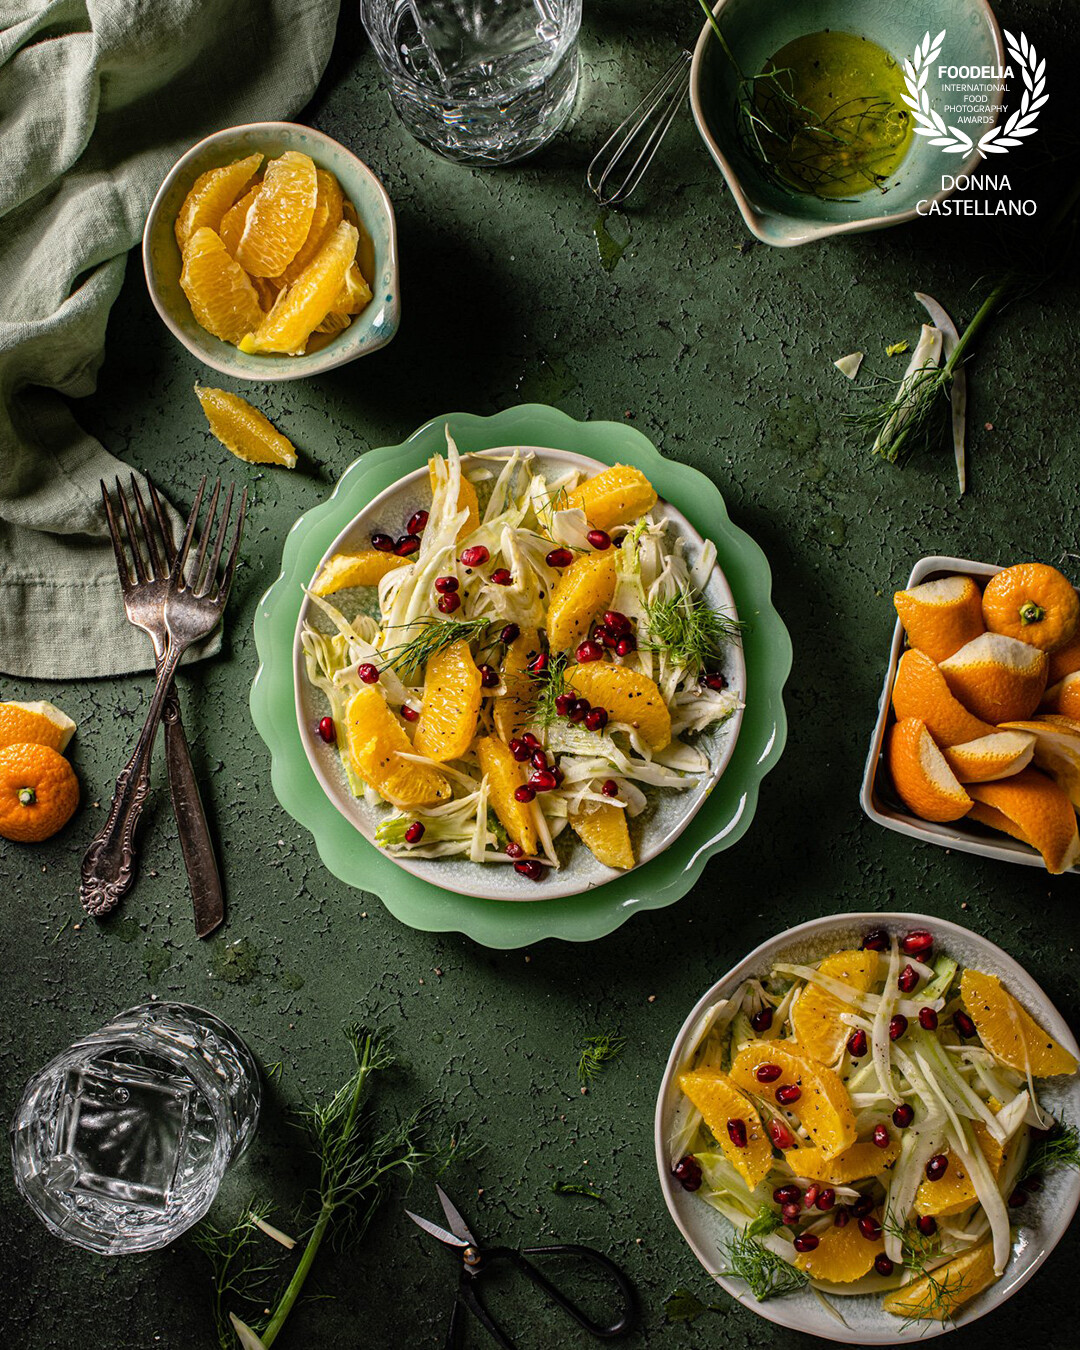 Orange and fennel salad is the cure for any late winter blues with it's fragrant scent and bright beautiful colors. Fresh and simple yet so elegant.